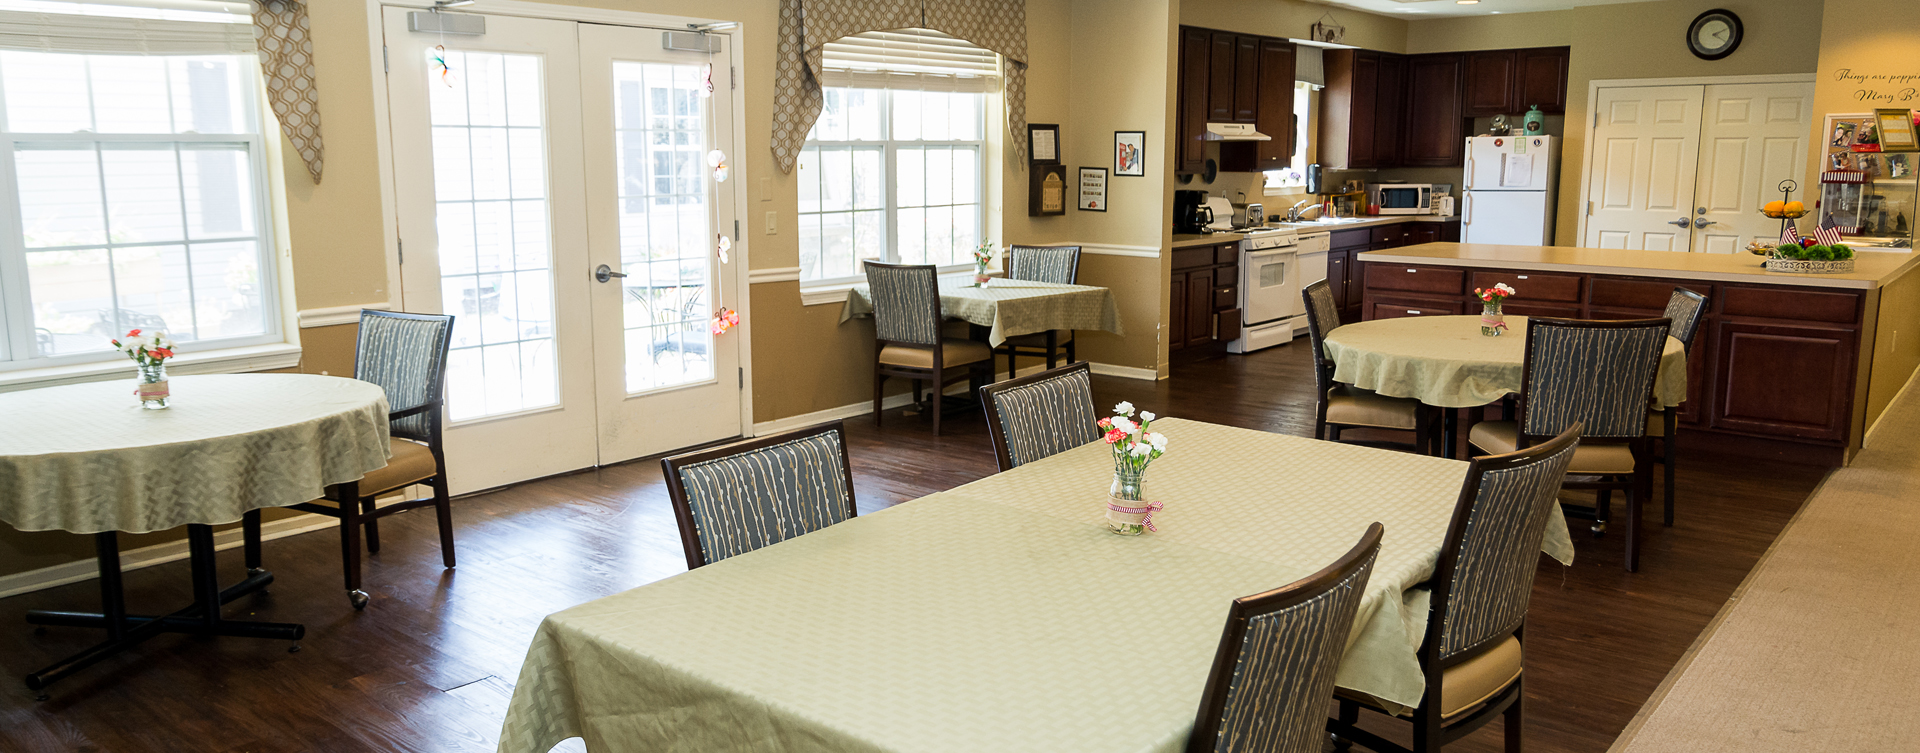 Residents with dementia receive additional assistance with meals in our Mary B’s dining room at Bickford of Oswego